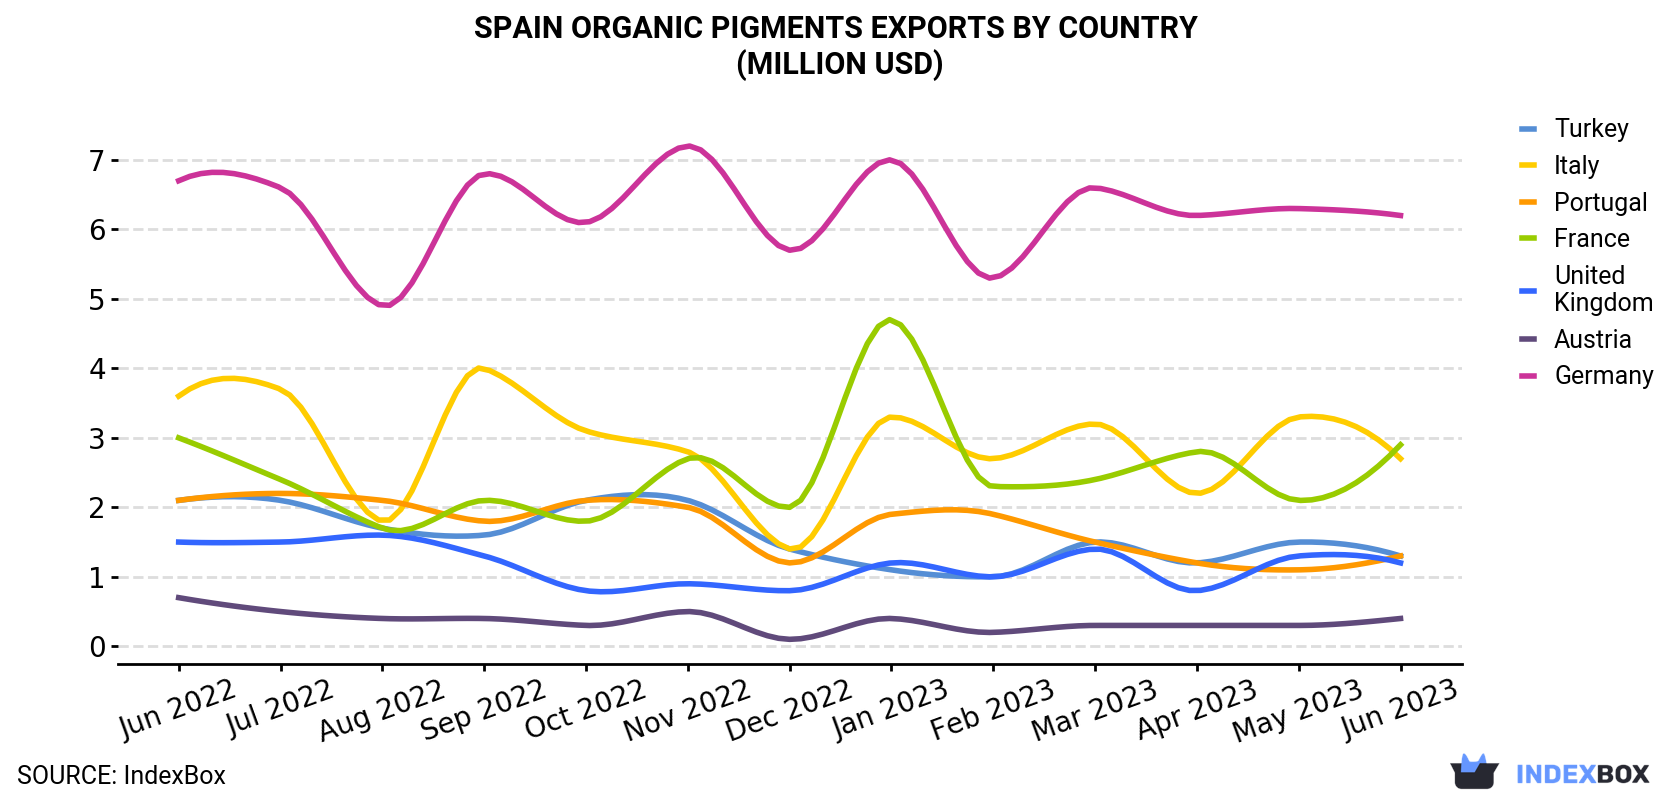 Spain Organic Pigments Exports By Country (Million USD)